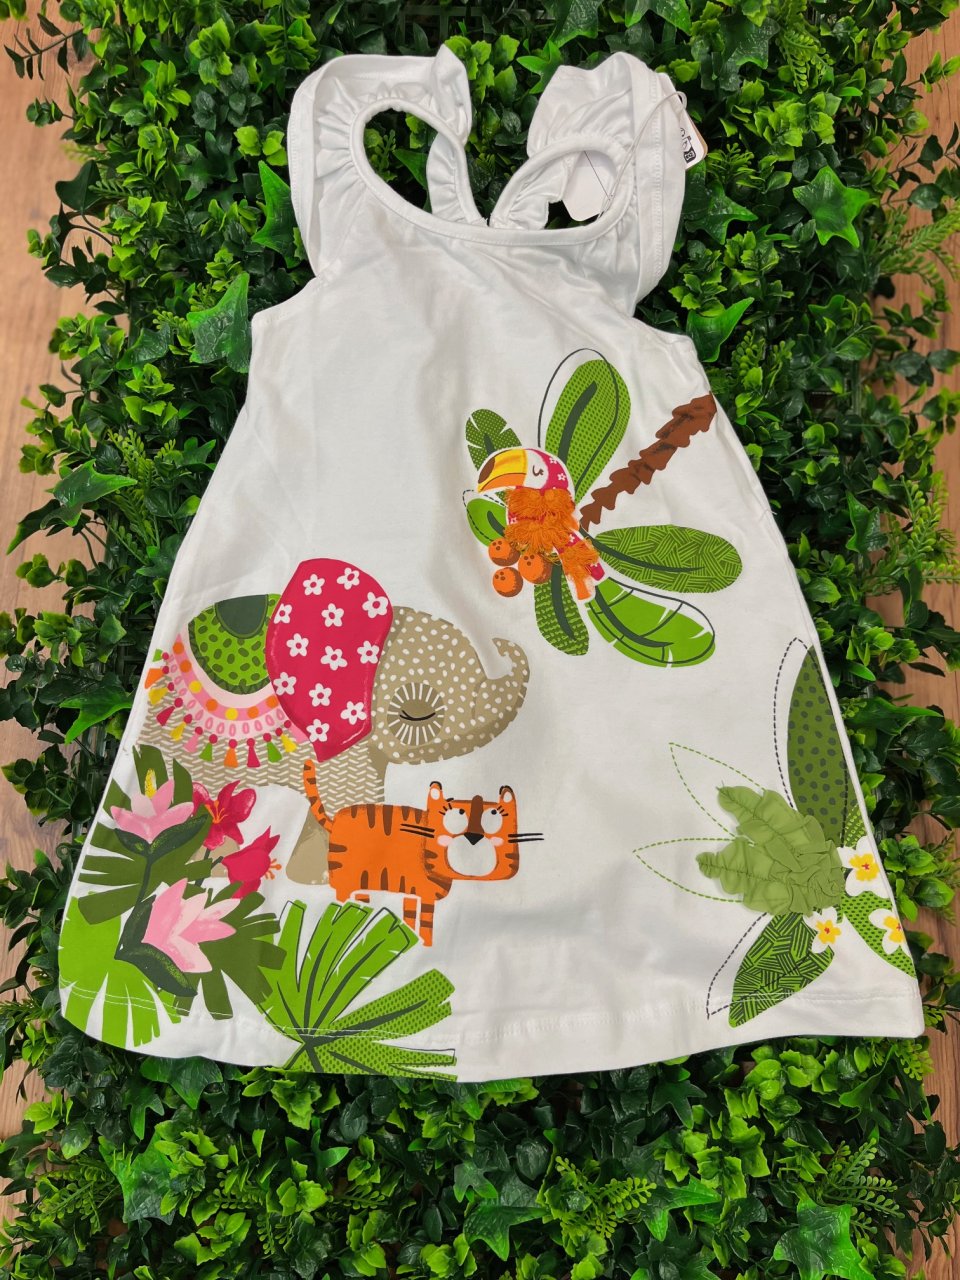 MAYORAL 3944  WHITE COTTON A LINE DRESS  JUNGLE PRINT DETAIL RUFFLE SHOULDER AND BACK DESIGN 4,5,8,&9YRS 